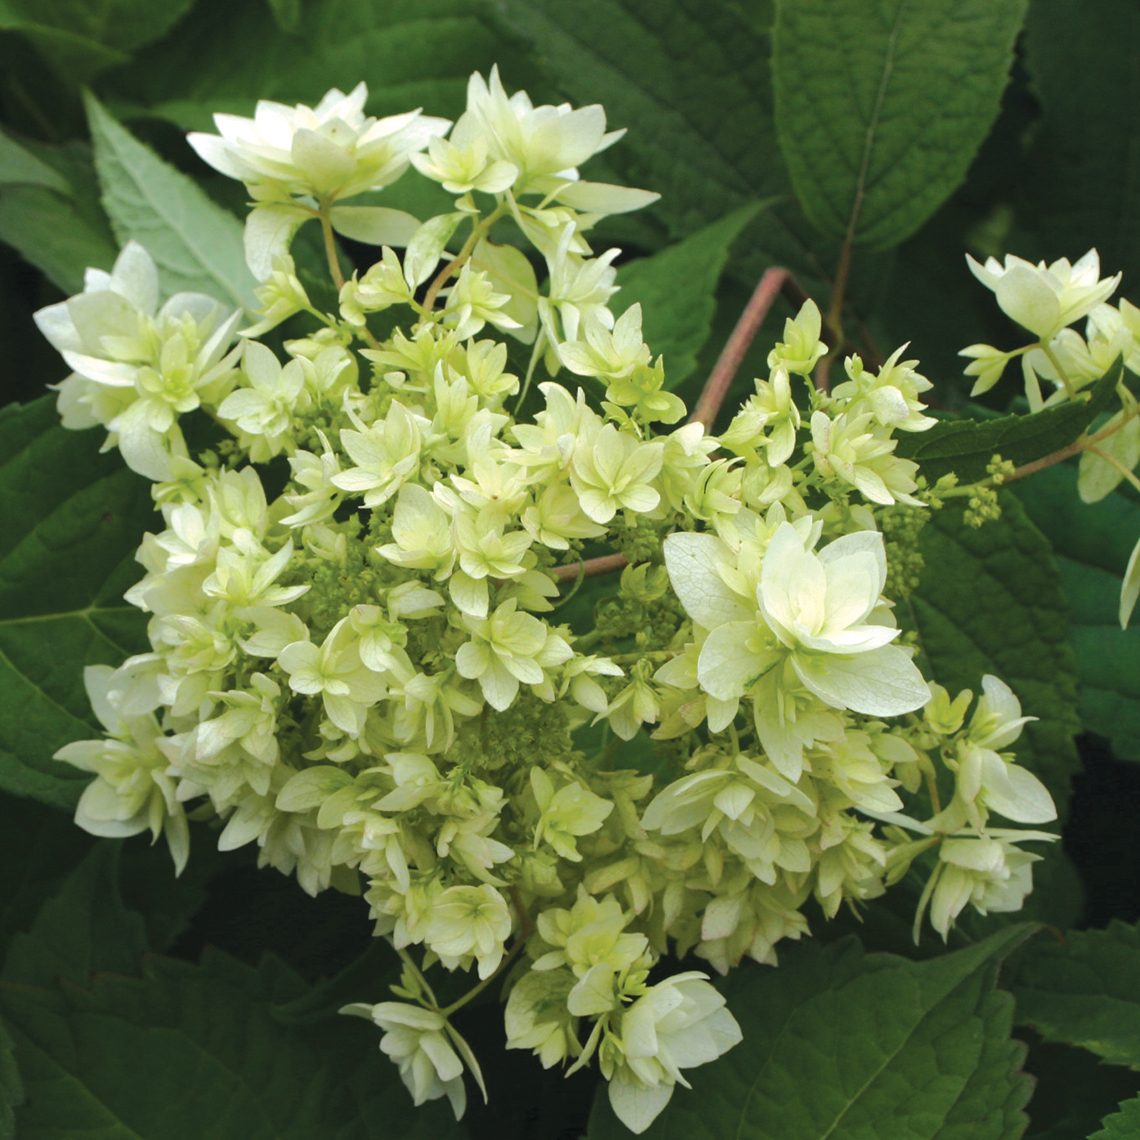 Closeup of the unusual doubled blooms of Hayes Starburst hydrangea